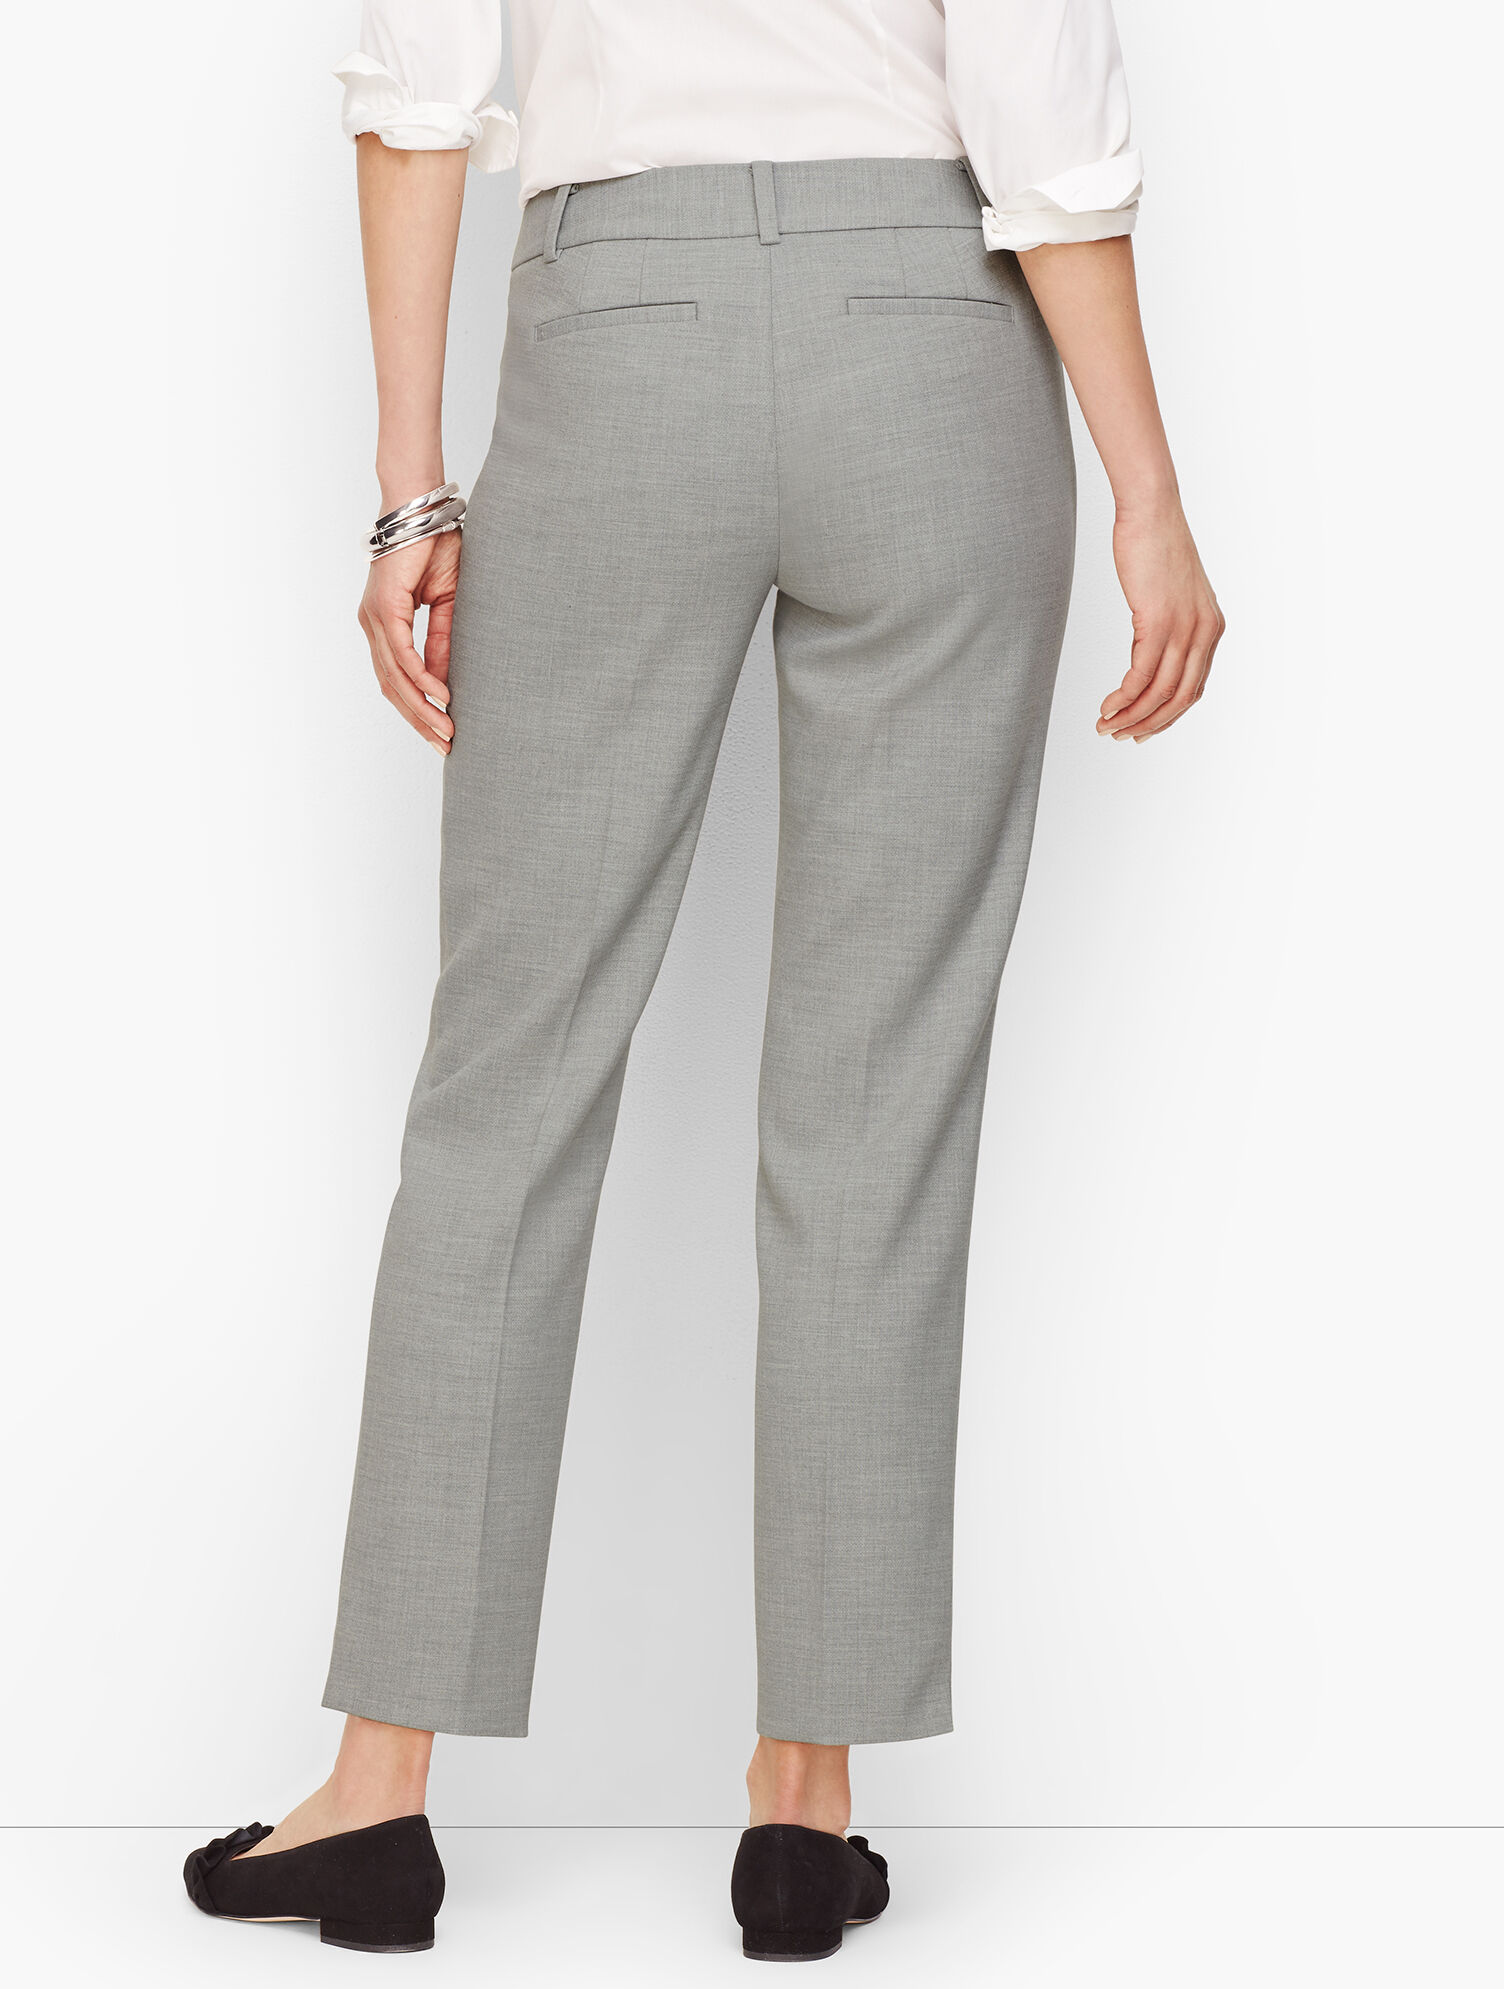 Talbots Hampshire Ankle Pants - Jacquard Butterfly